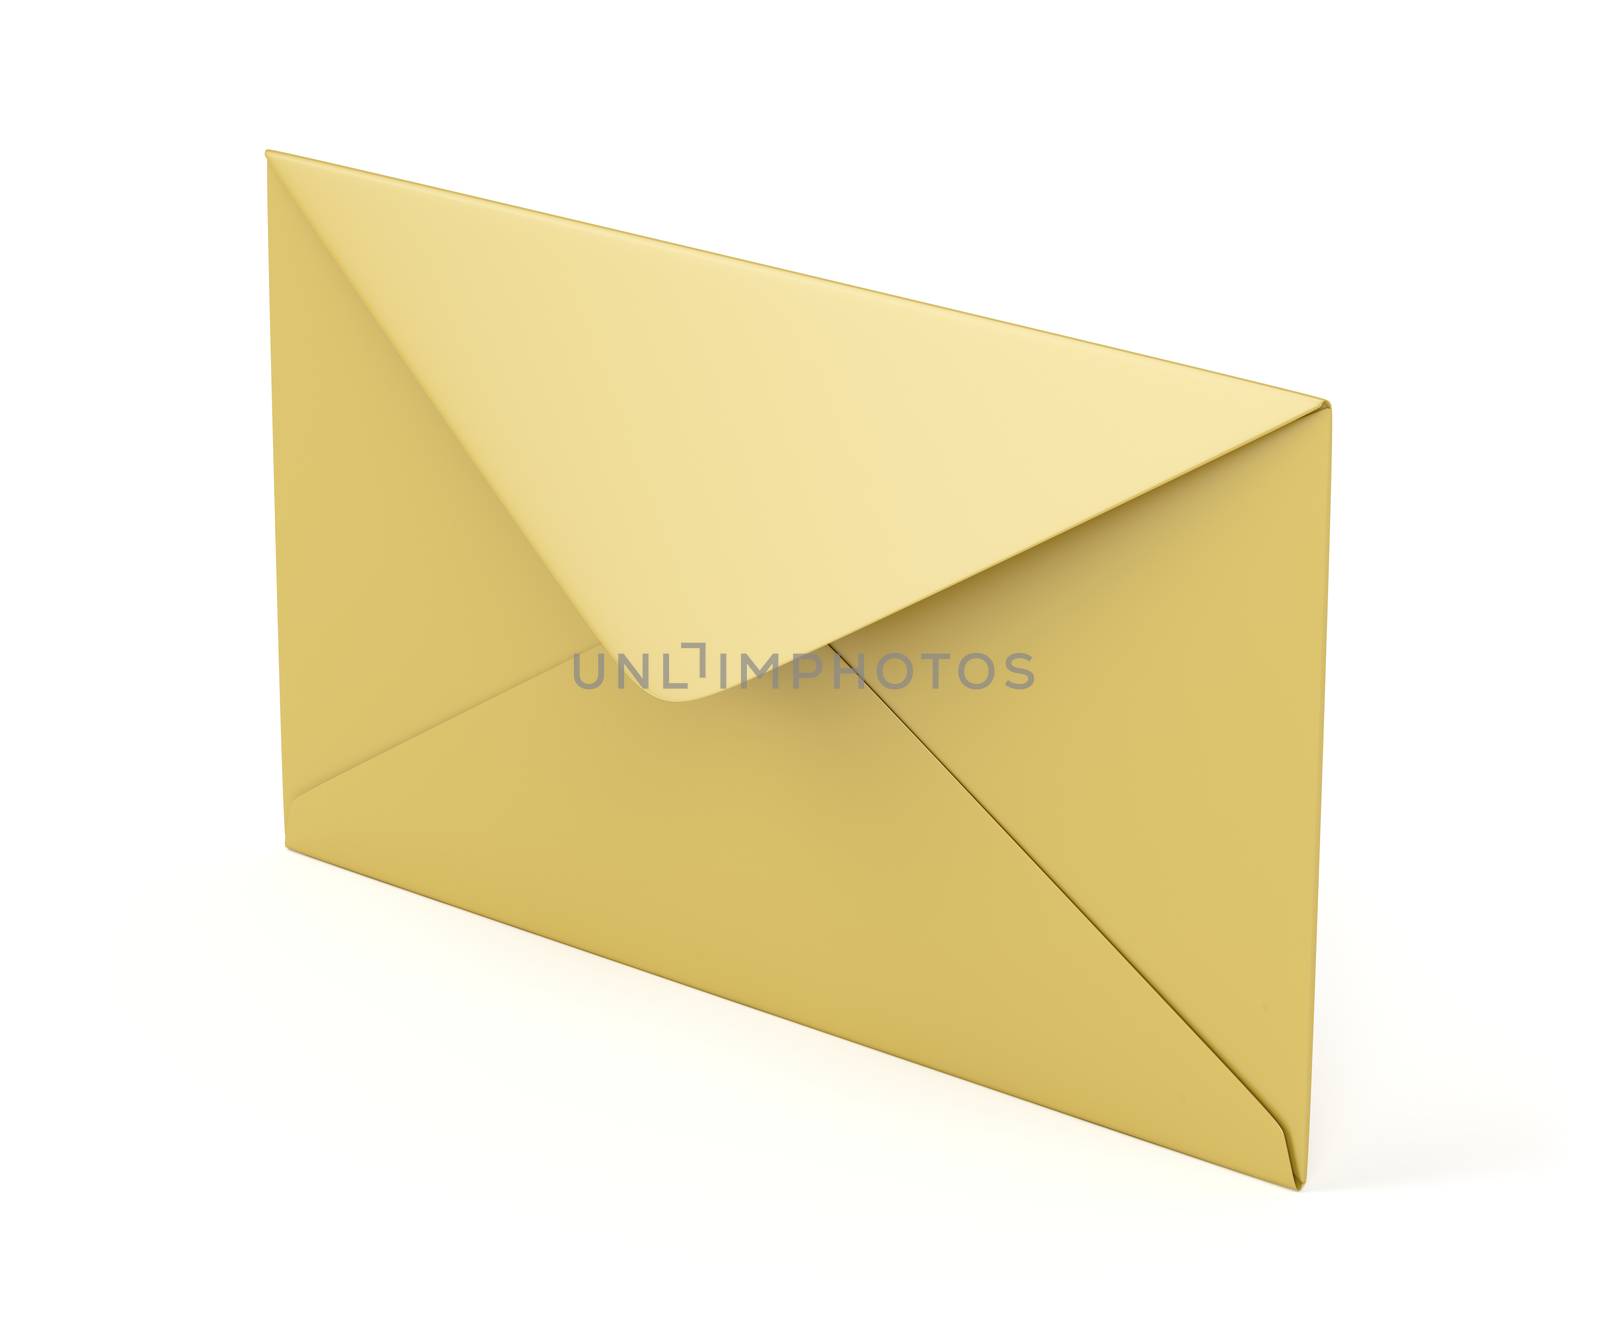 Envelope by magraphics